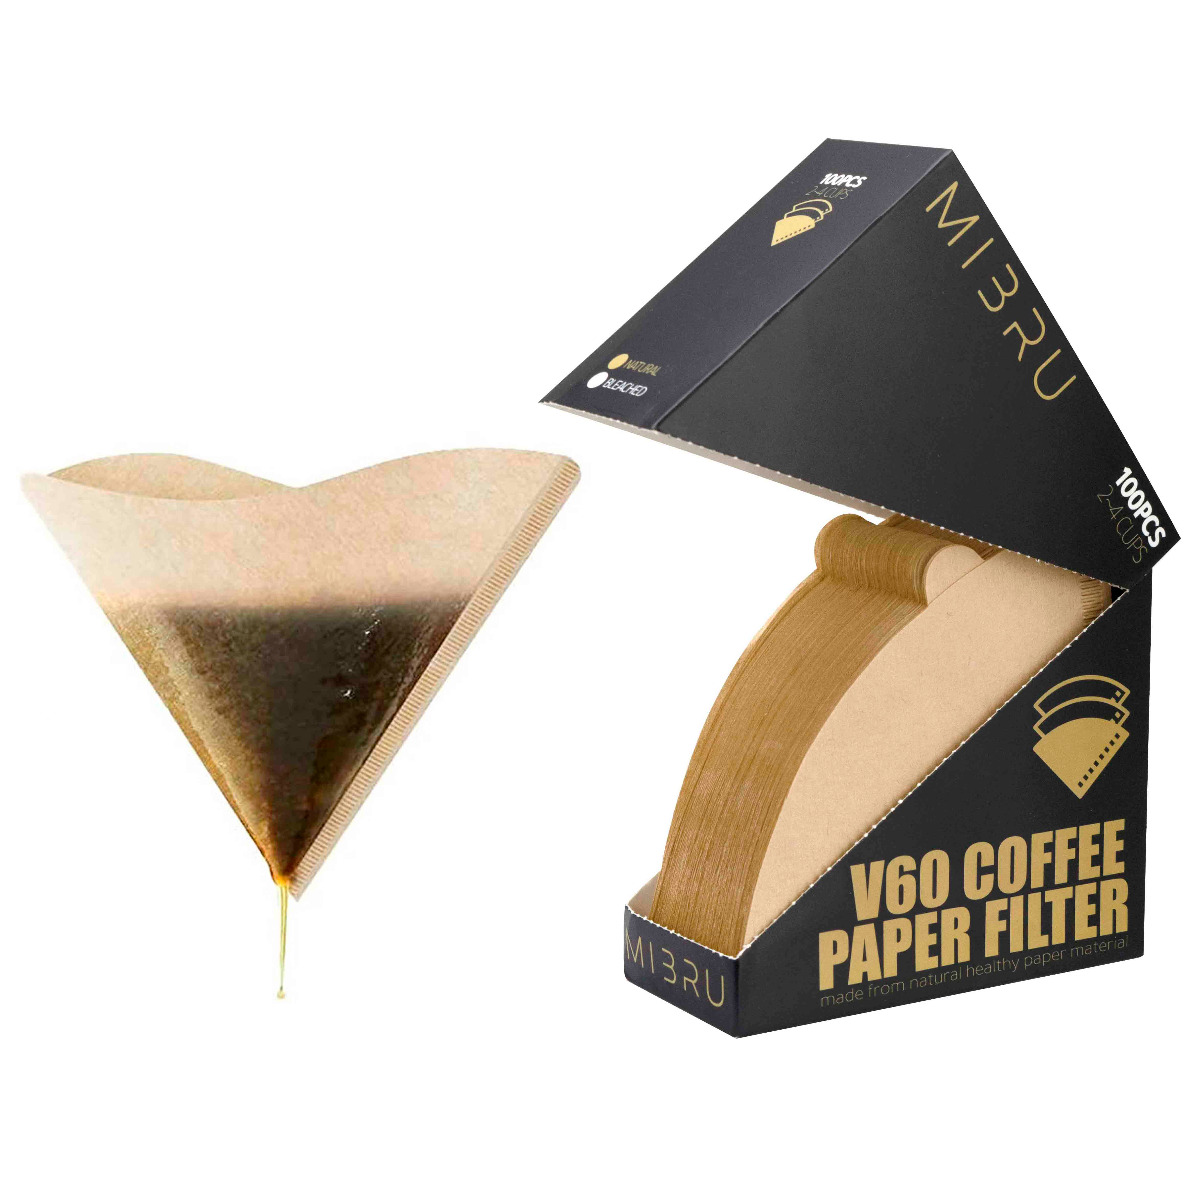 Coffee v60 paper filter brown 100pcs with box